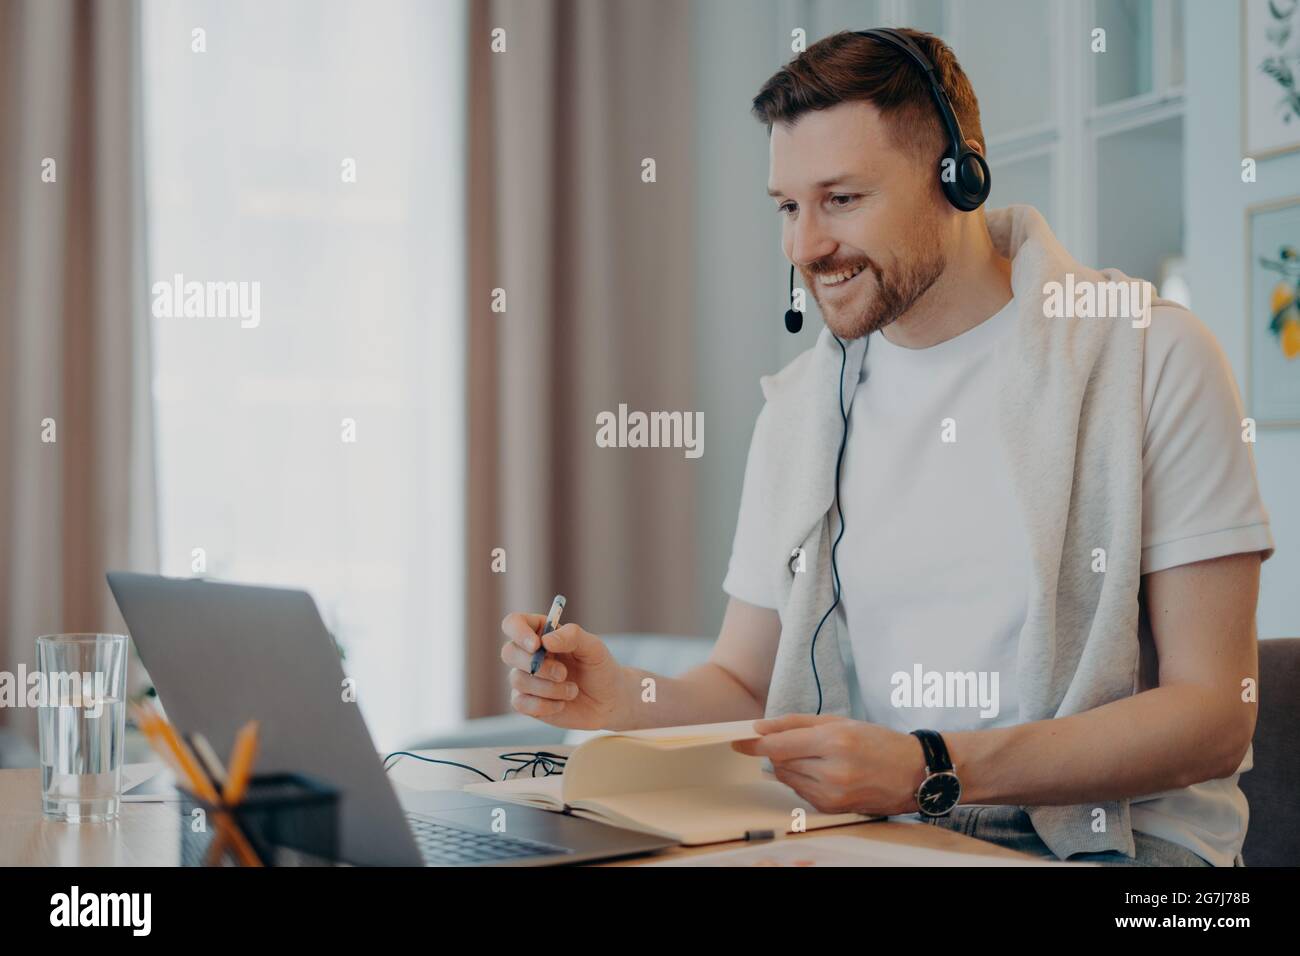 Glad male tutor gives online lessons comunicates distantly with trainee uses headphones with microphone and laptop makes necessary notes in diary Stock Photo